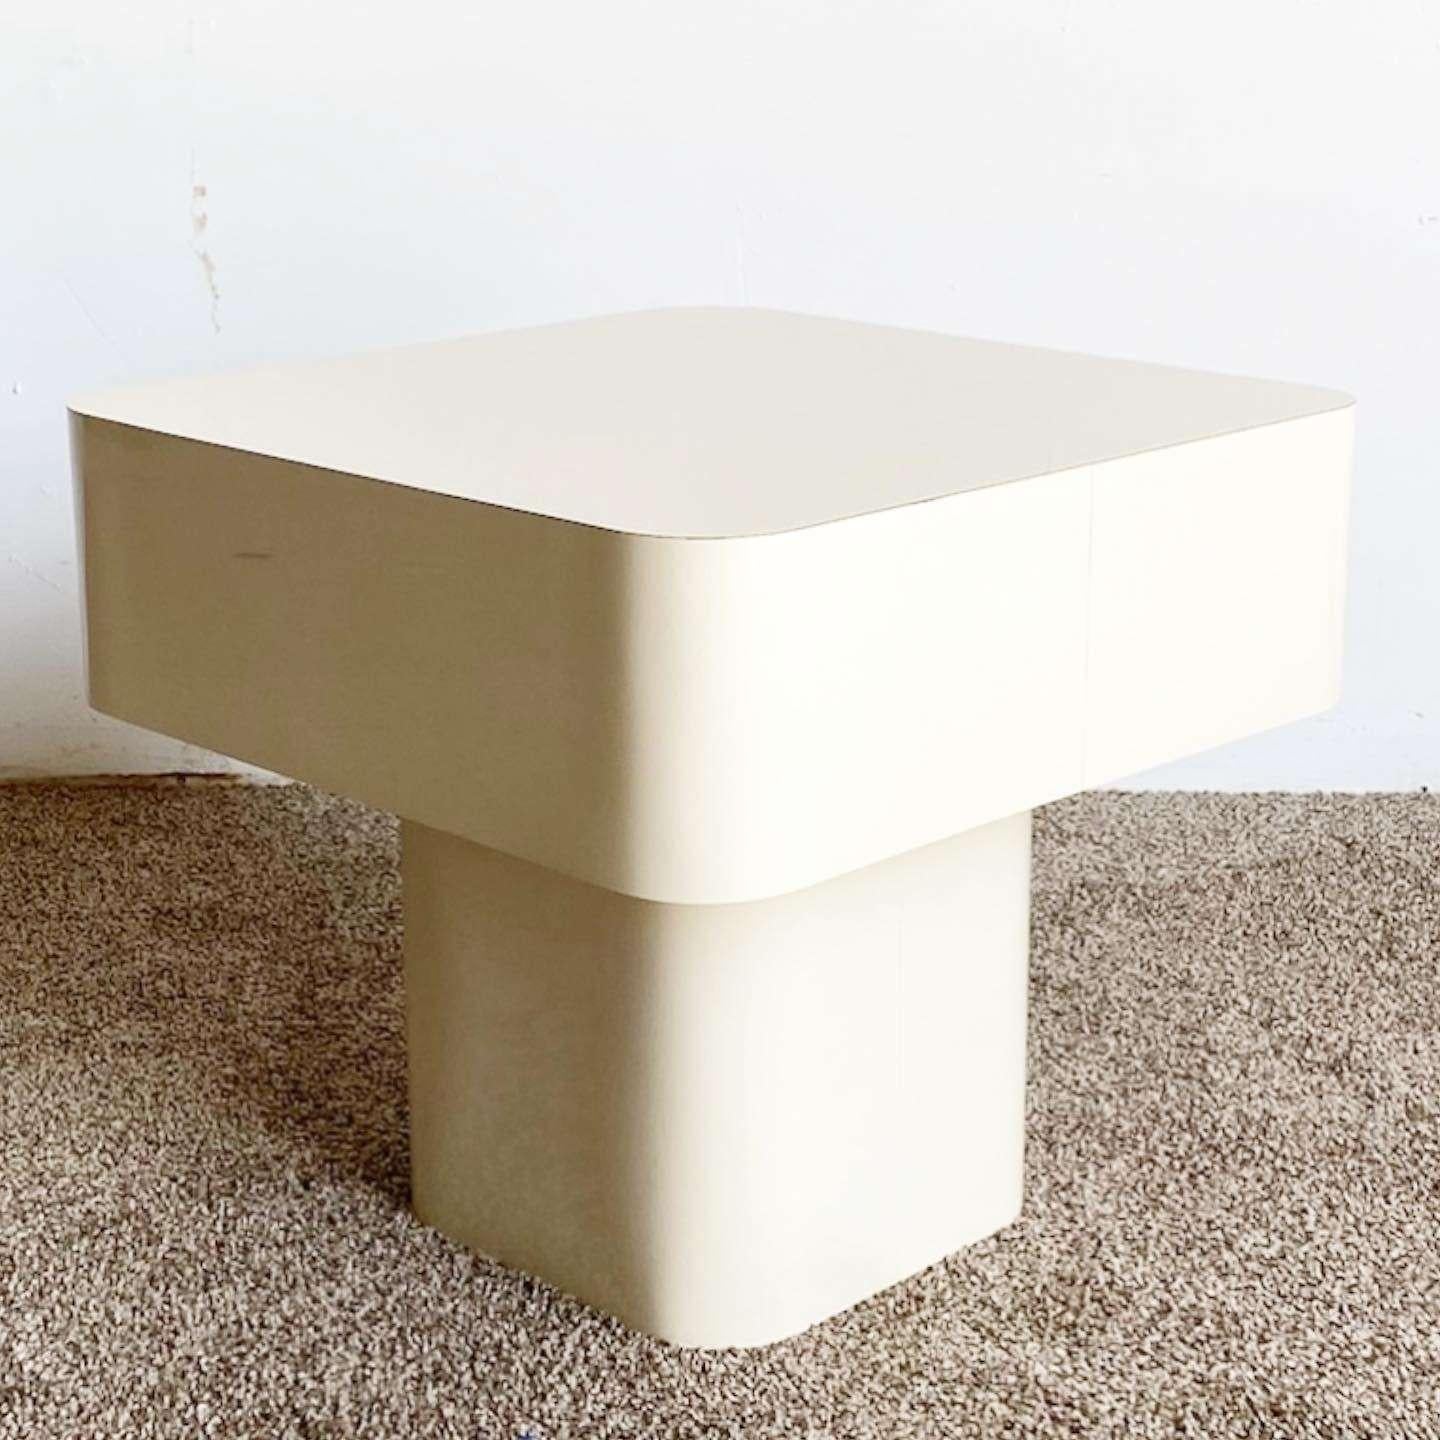 Exceptional vintage postmodern mushroom side table. Features a cream lacquer laminate and a square top with rounded edges.
